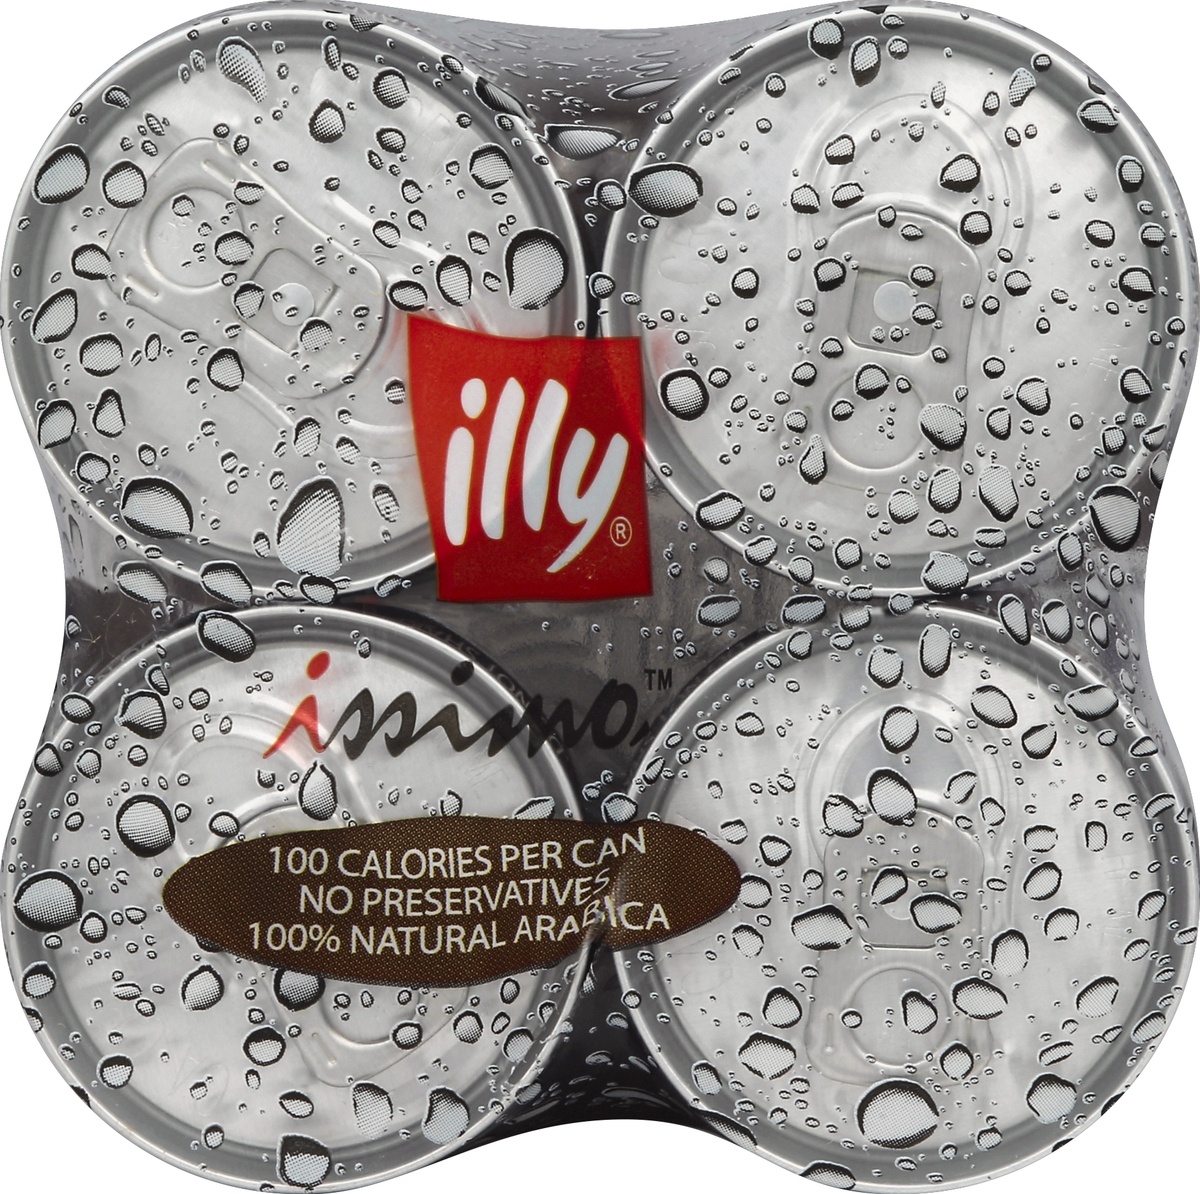 slide 2 of 4, illy Coffee Drink 4 ea, 33.6 oz